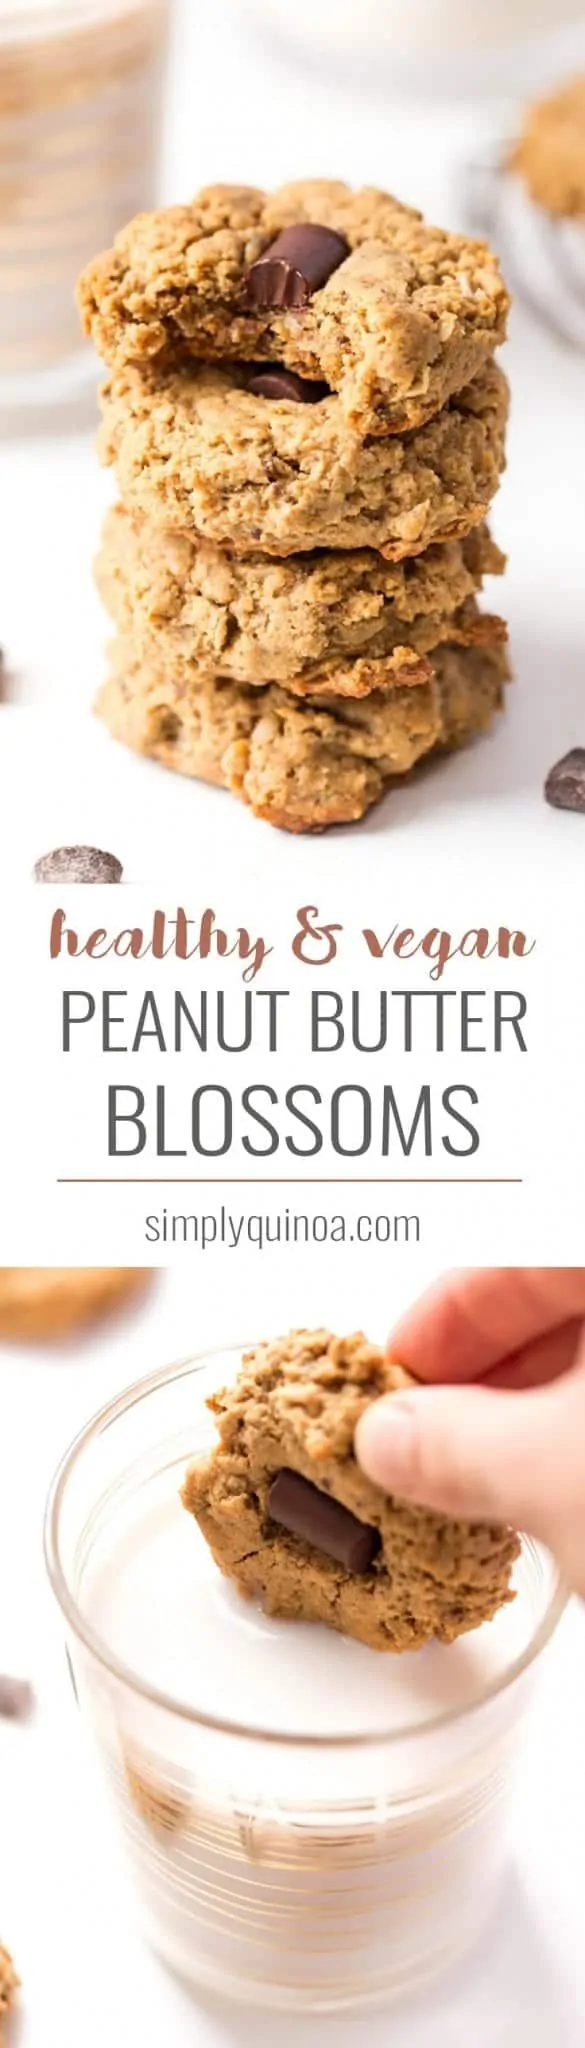 These HEALTHY PEANUT BUTTER BLOSSOMS are a fun, lower calorie twist on this classic recipe. Made gluten-free, refined sugar-free, high protein and vegan!